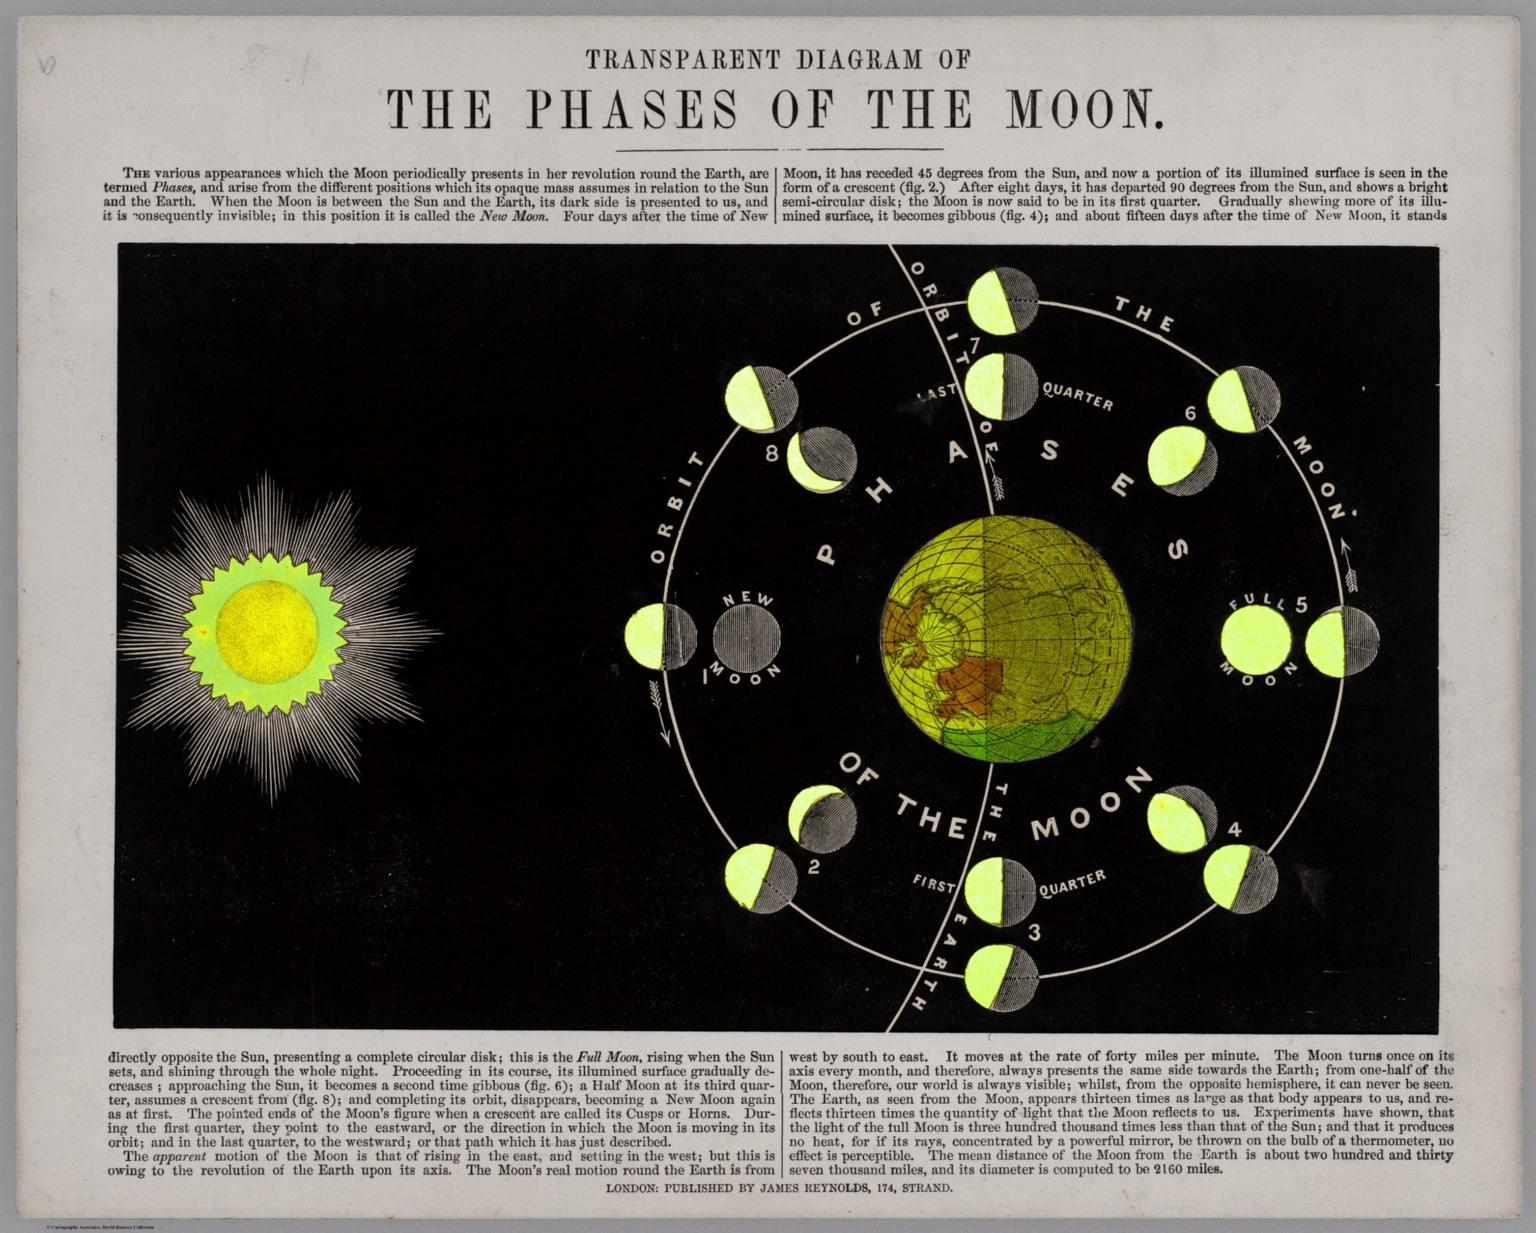 (backlit) Transparent diagram of the phases of the Moon